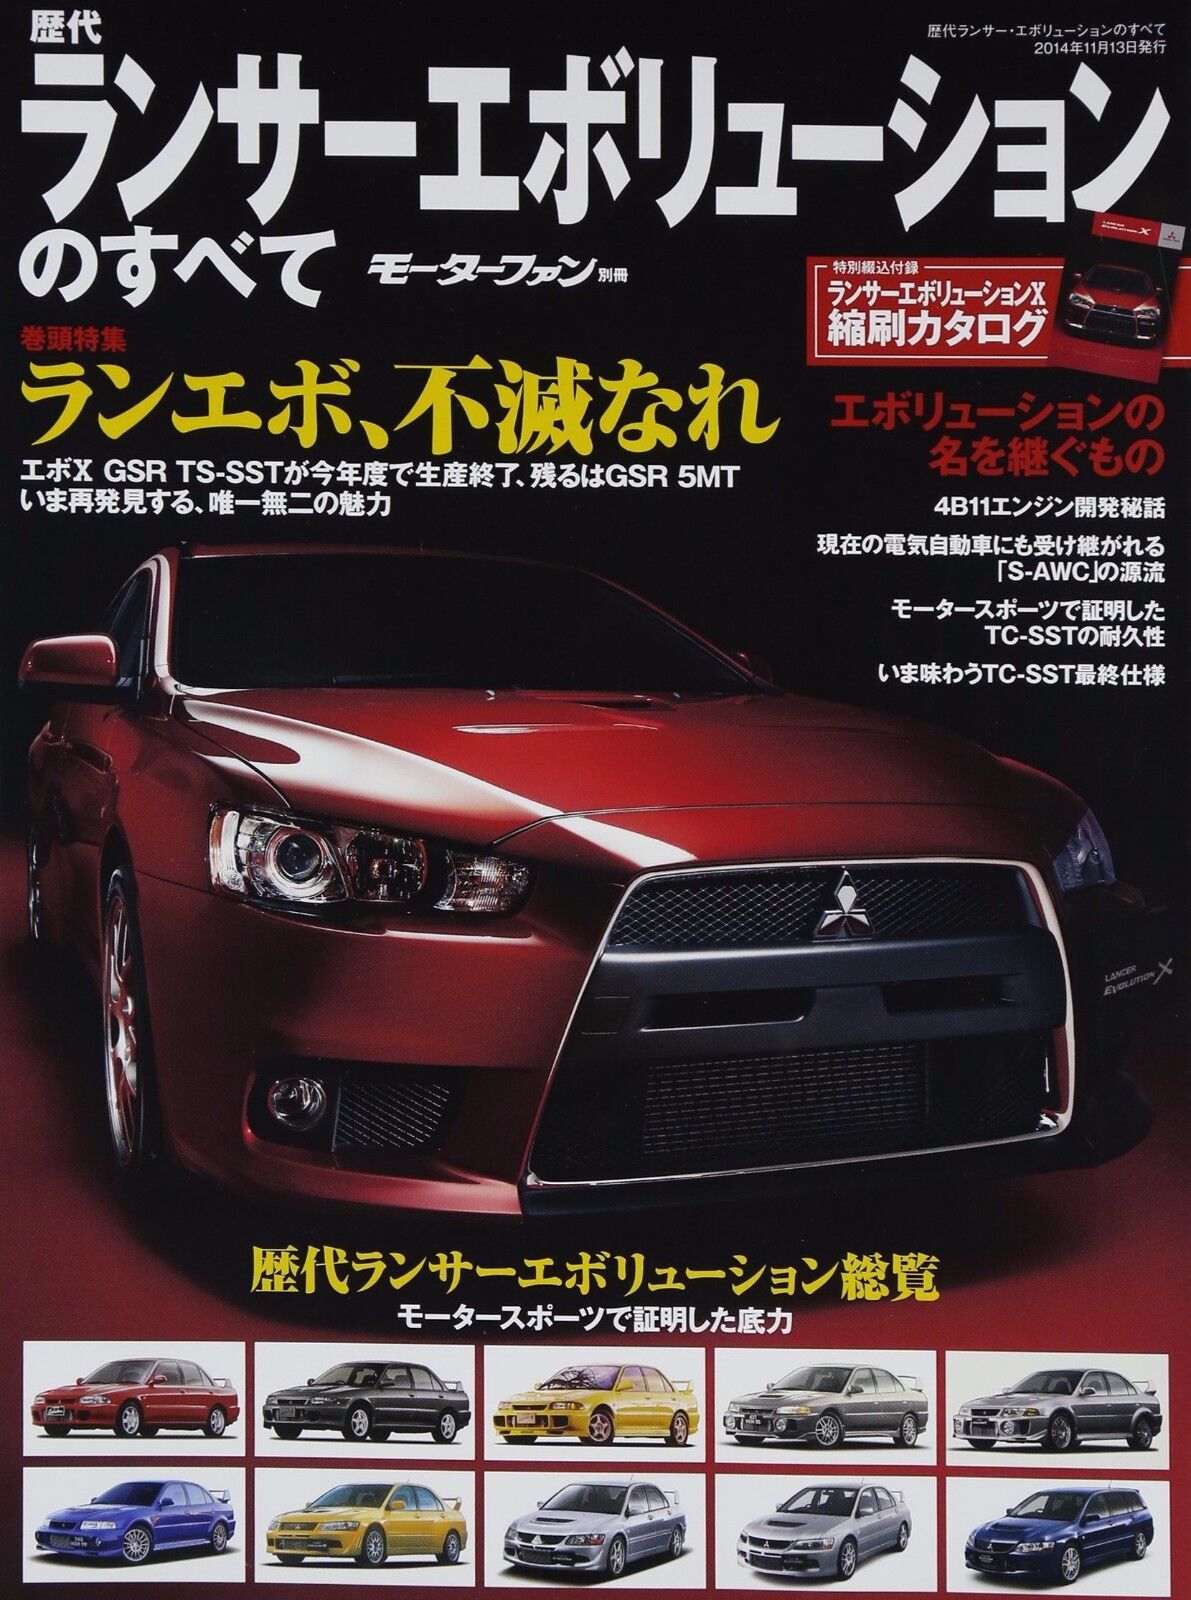 All of the history of MITSUBISHI Lancer Evolution Complete Data & Analysis Book